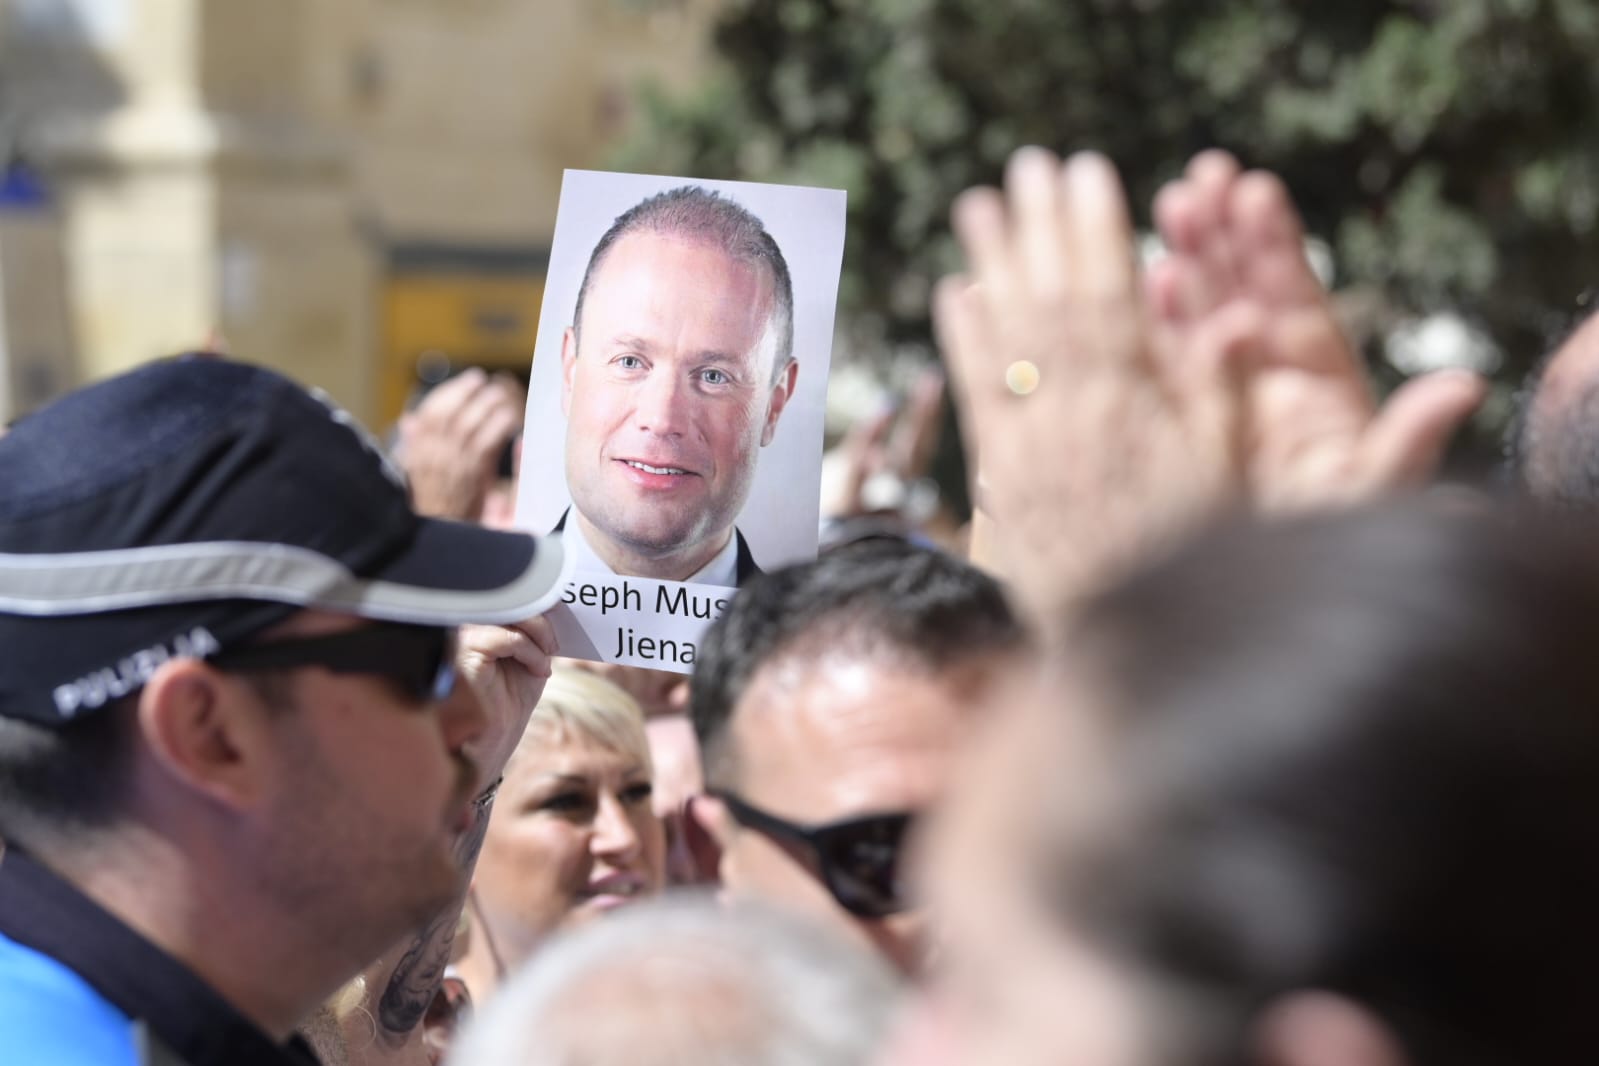 Malta Charges Ex PM and His Top Officials with Corruption